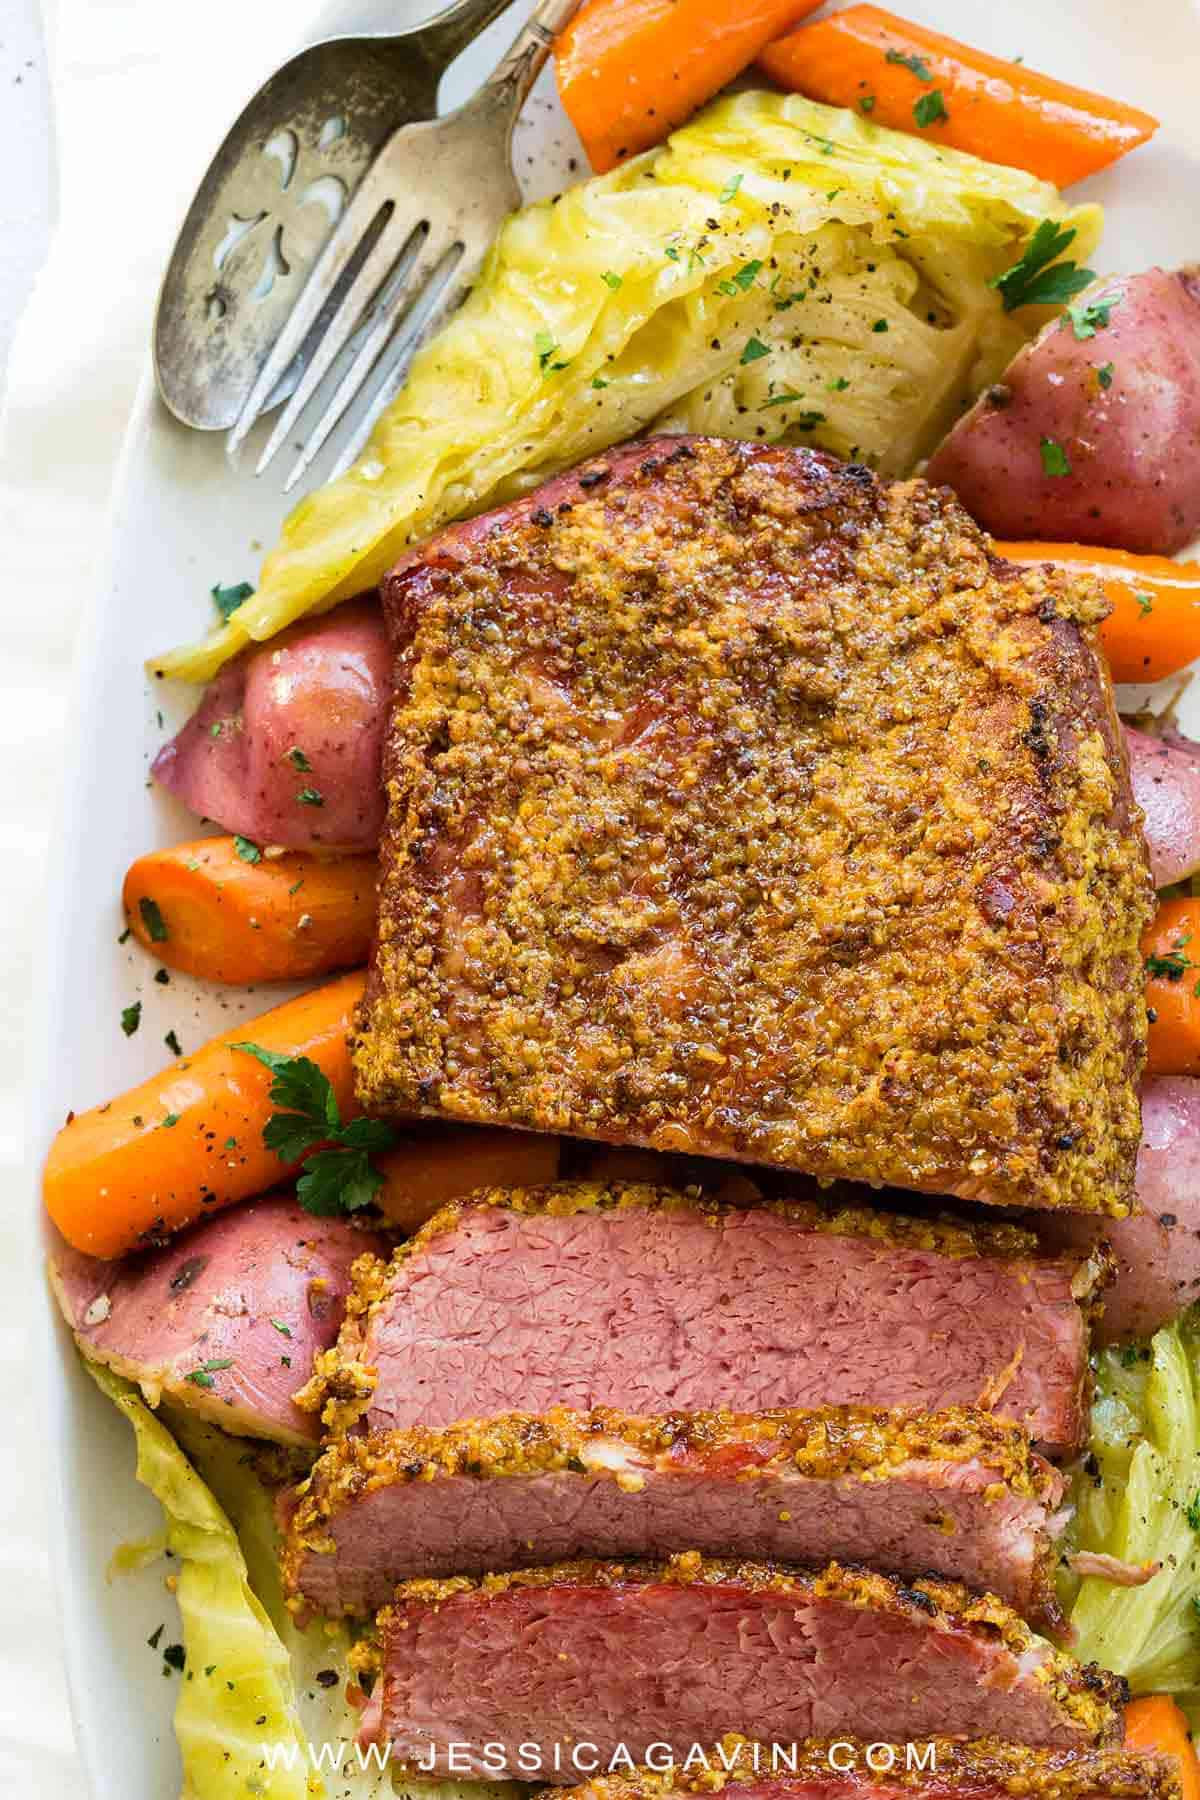 Corned Beef And Cabbage Calories
 Corned Beef and Cabbage Instant Pot Jessica Gavin